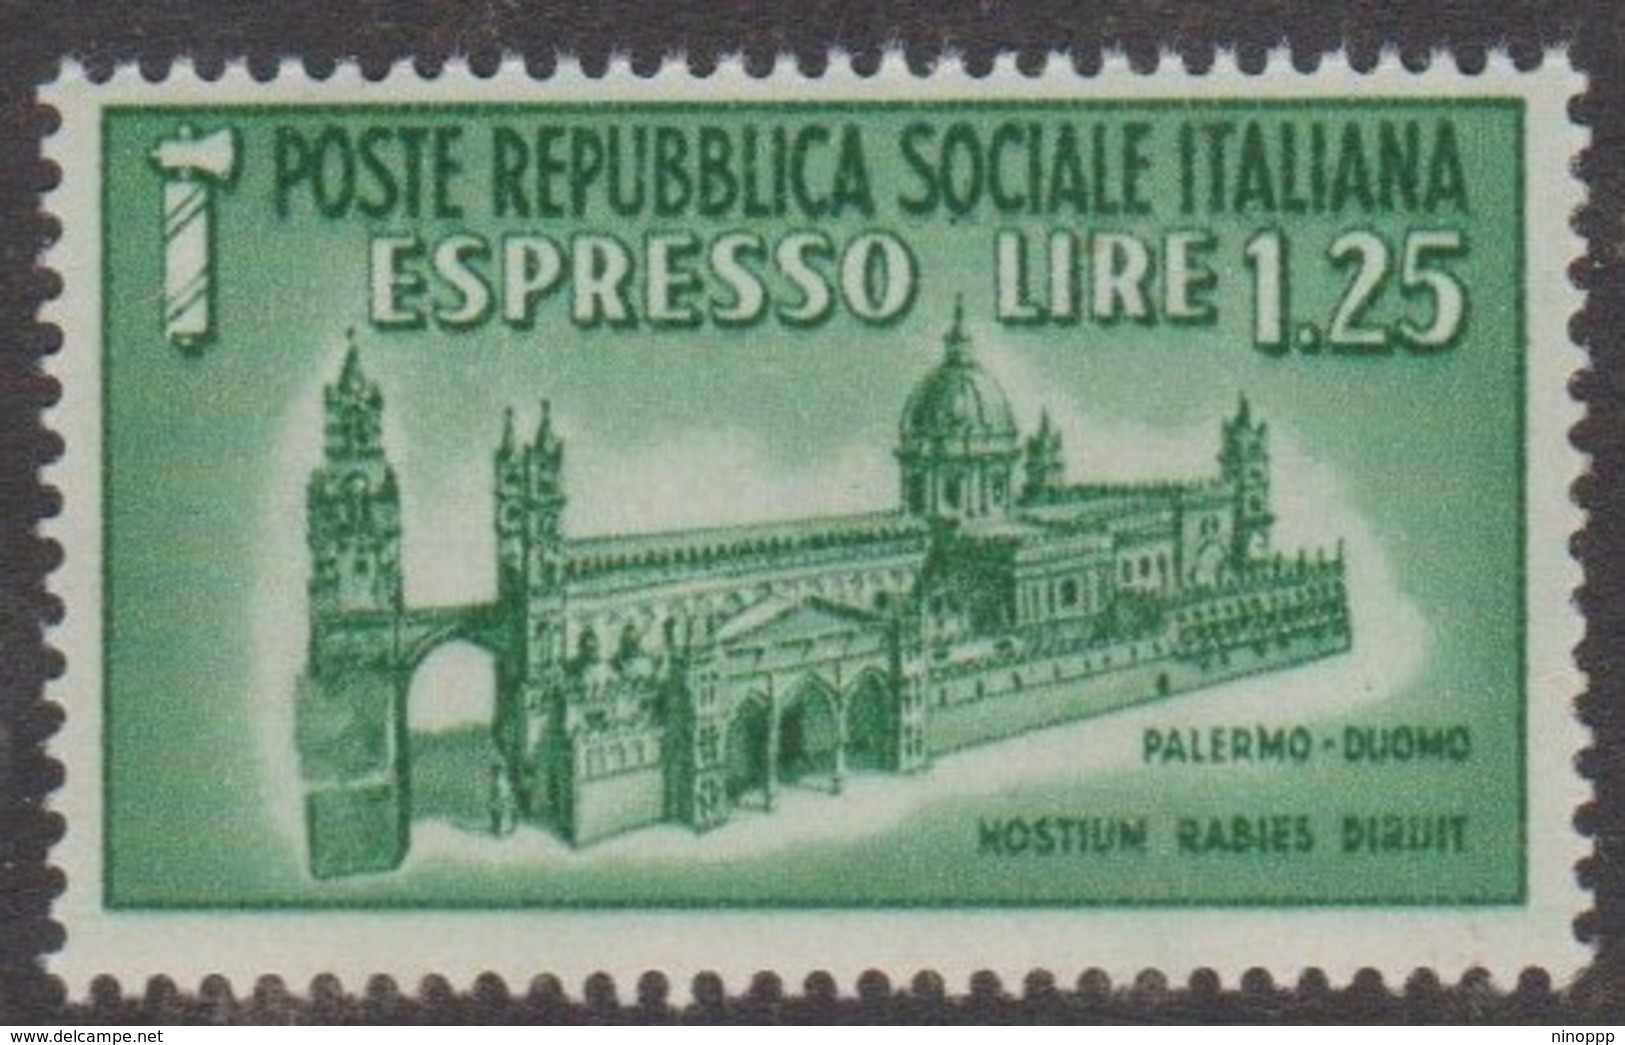 Italy Repubblica Sociale Italiana E 10 1944 Special Delivery Lire 1.25 Green Palerme Dome, Mint Never Hinged, - Eilsendung (Eilpost)